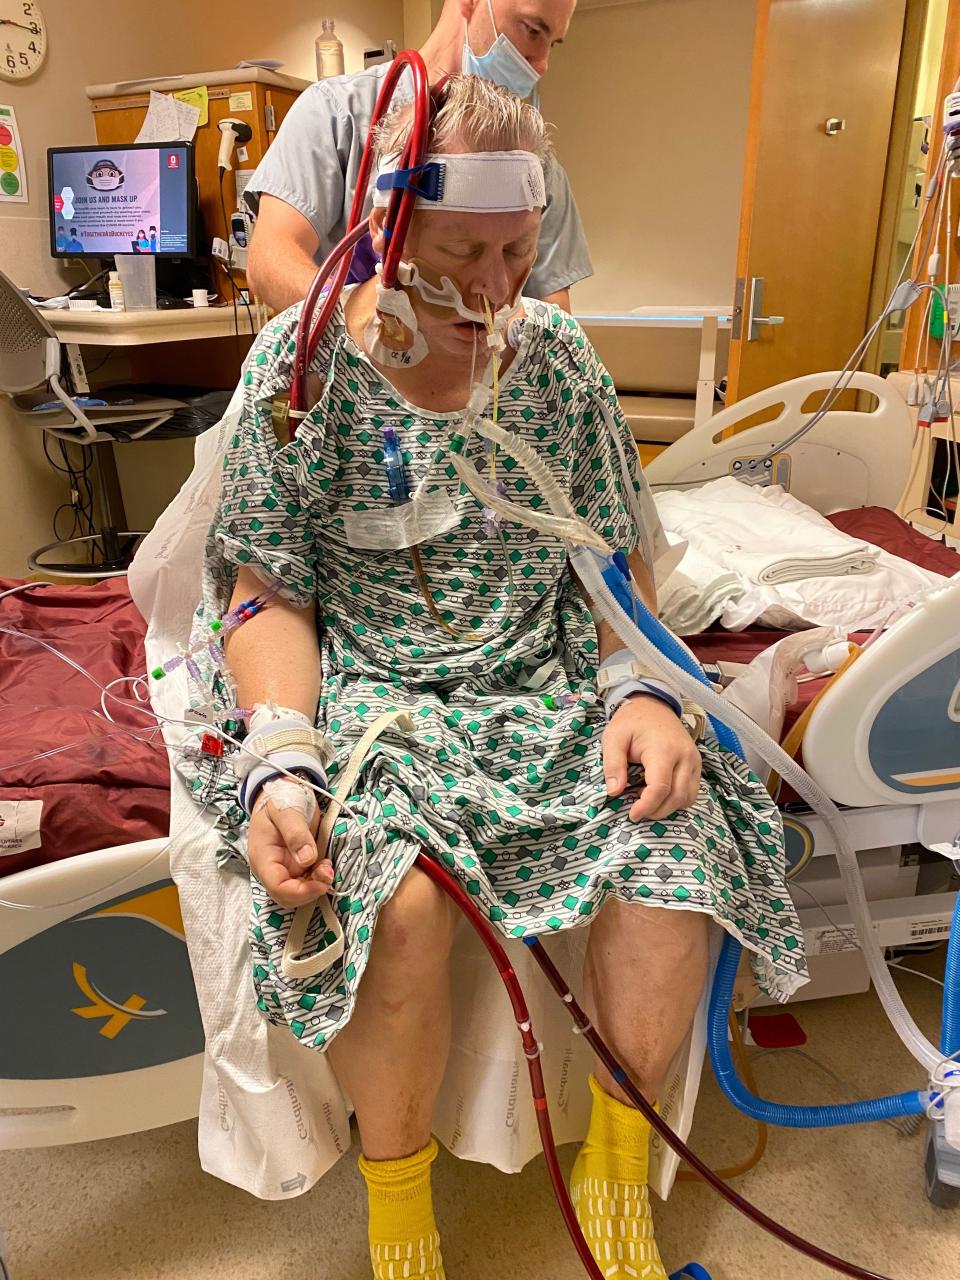 Mike Kaster, of Carmel, Indiana, after receiving a double lung transplant and concurrent bypass in September at the Ohio State University Wexner Medical Center in Columbus.